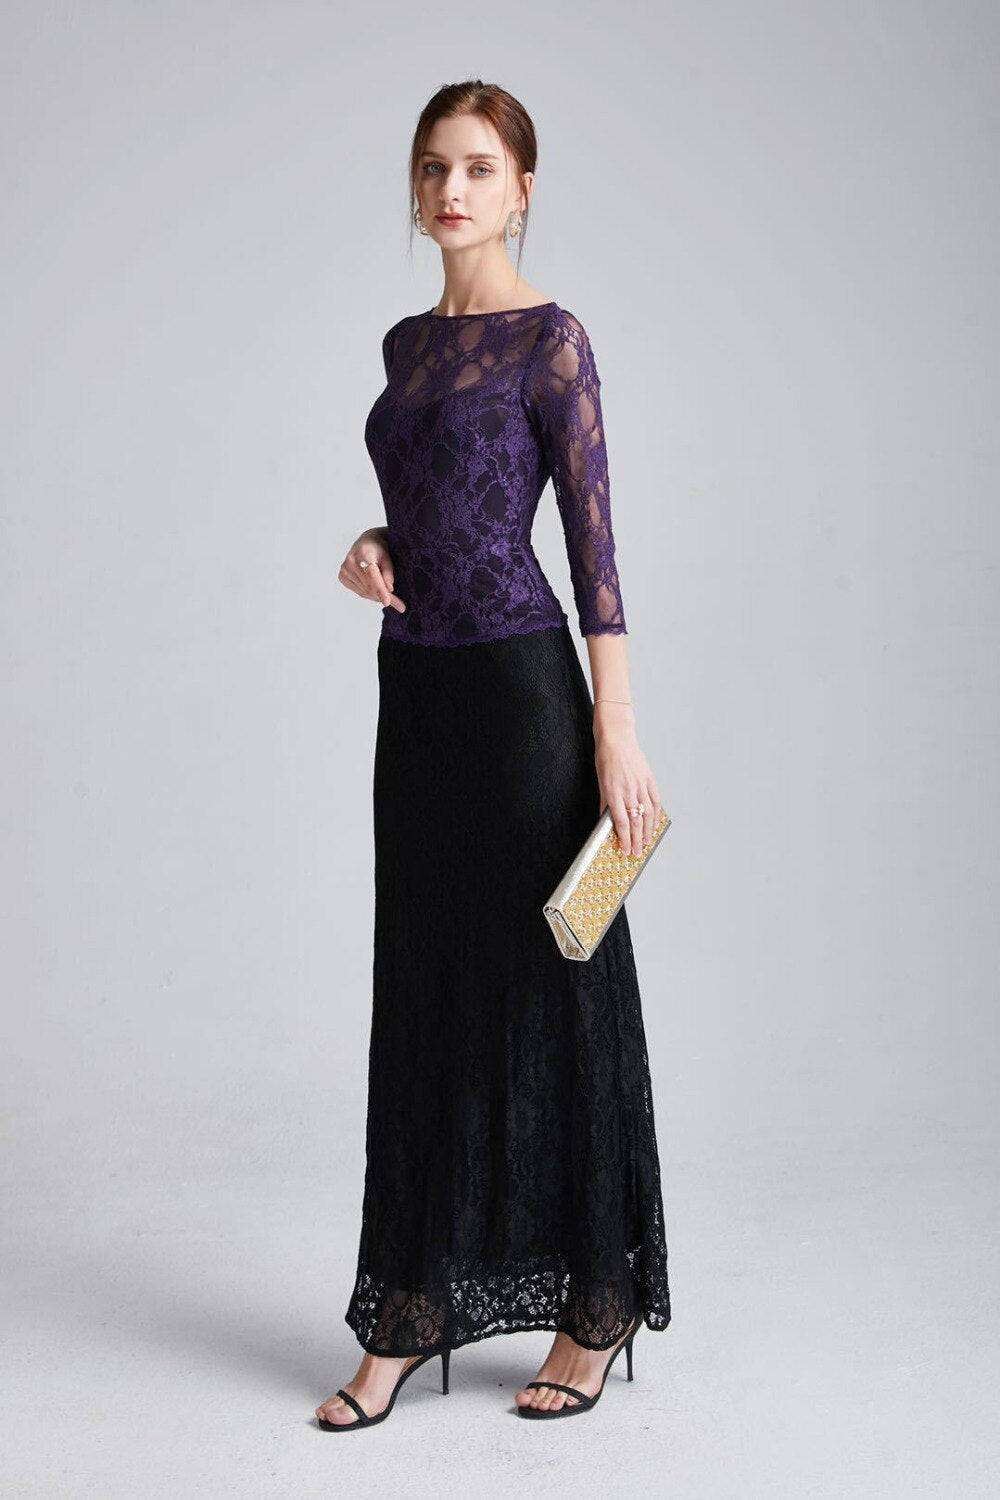 3/4 Sleeves Embroidery Lace Color Block Fashion Long Party Prom Dresses